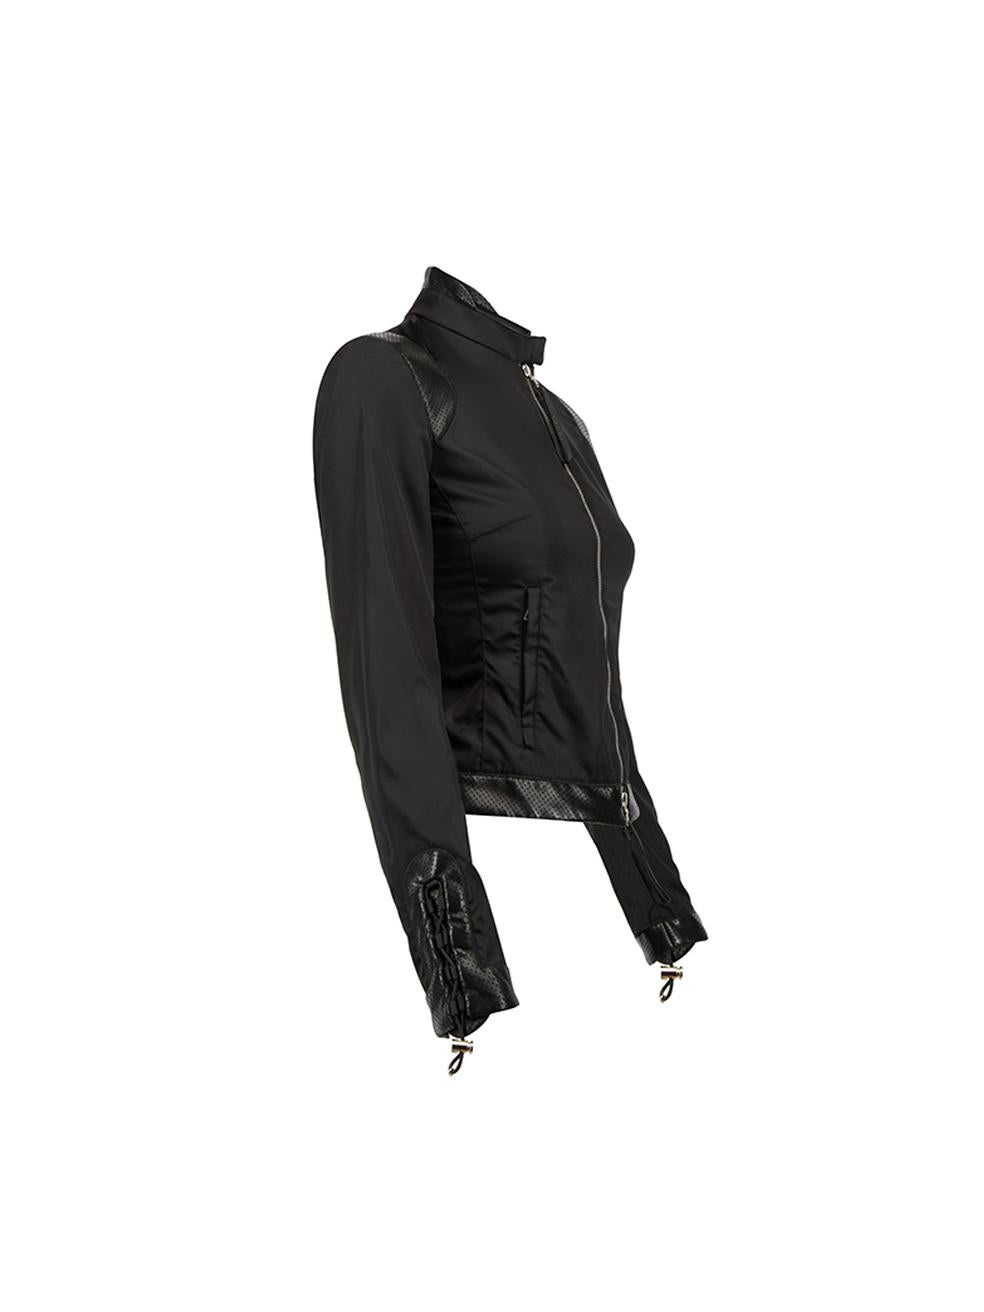 CONDITION is Very good. Hardly any visible wear to jacket is evident on this used Prada designer resale item. 



Details


Black

Synthetic

Track jacket

Front double zip closure

Drawstring on cuffs

Front side zipped pockets

Perforated leather